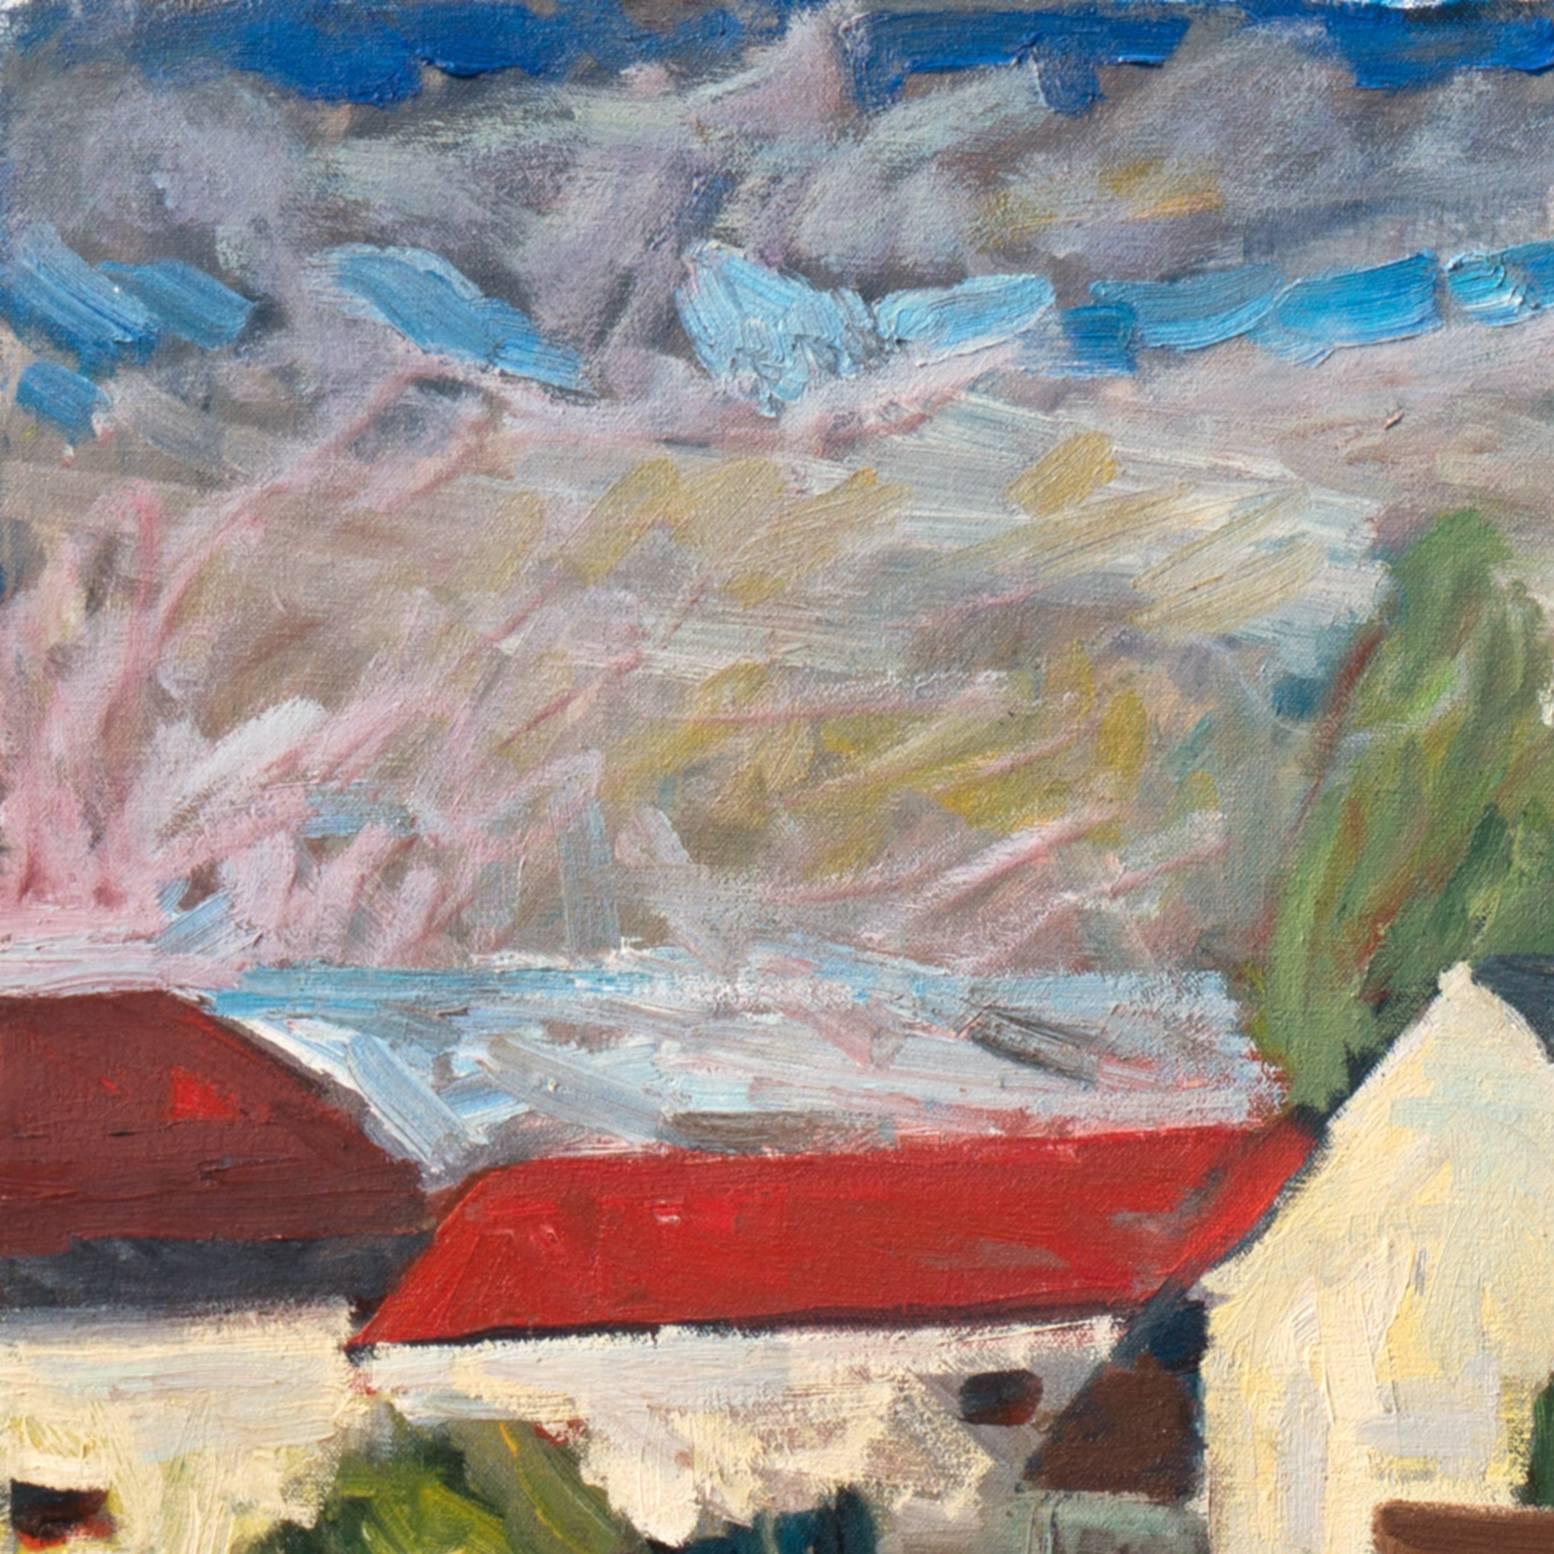 A Post-Impressionist California landscape showing a prospect of the Wilder Ranch estate, north of Santa Cruz, with a view beyond to the Pacific Ocean. 

Signed verso, 'Poplack' for Robert Poplack (American, 20th century), titled 'Wilder Ranch, S.C.'